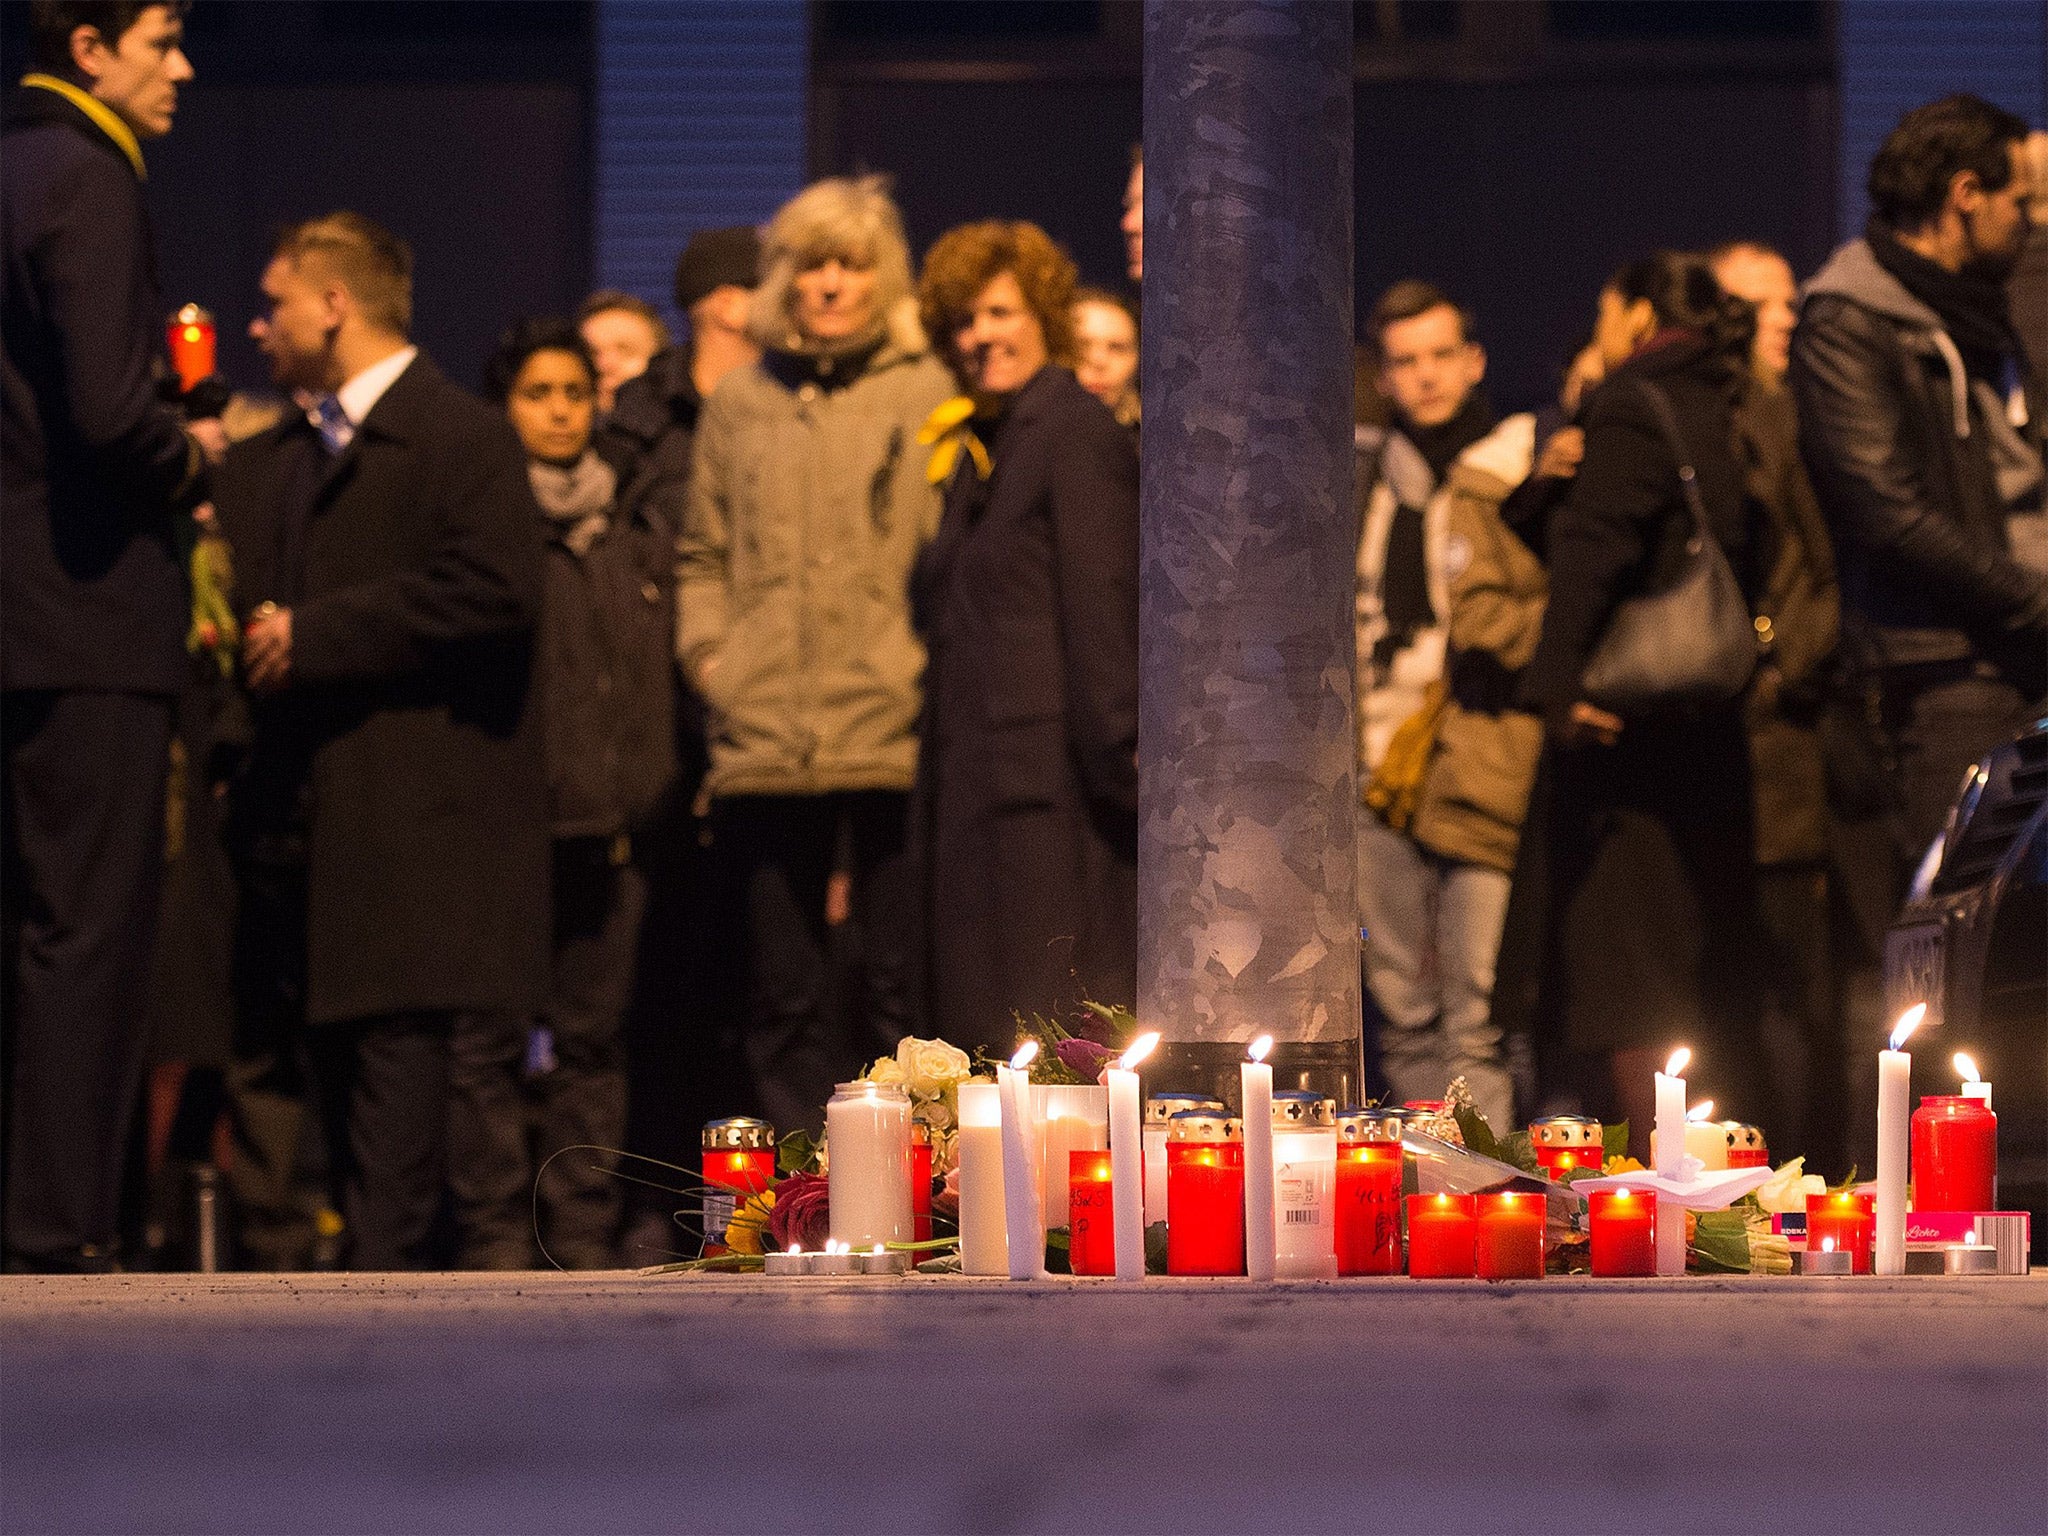 Staff members of Germanwings and Lufthansa hold a candlelight vigil outside their headquarters in Cologne